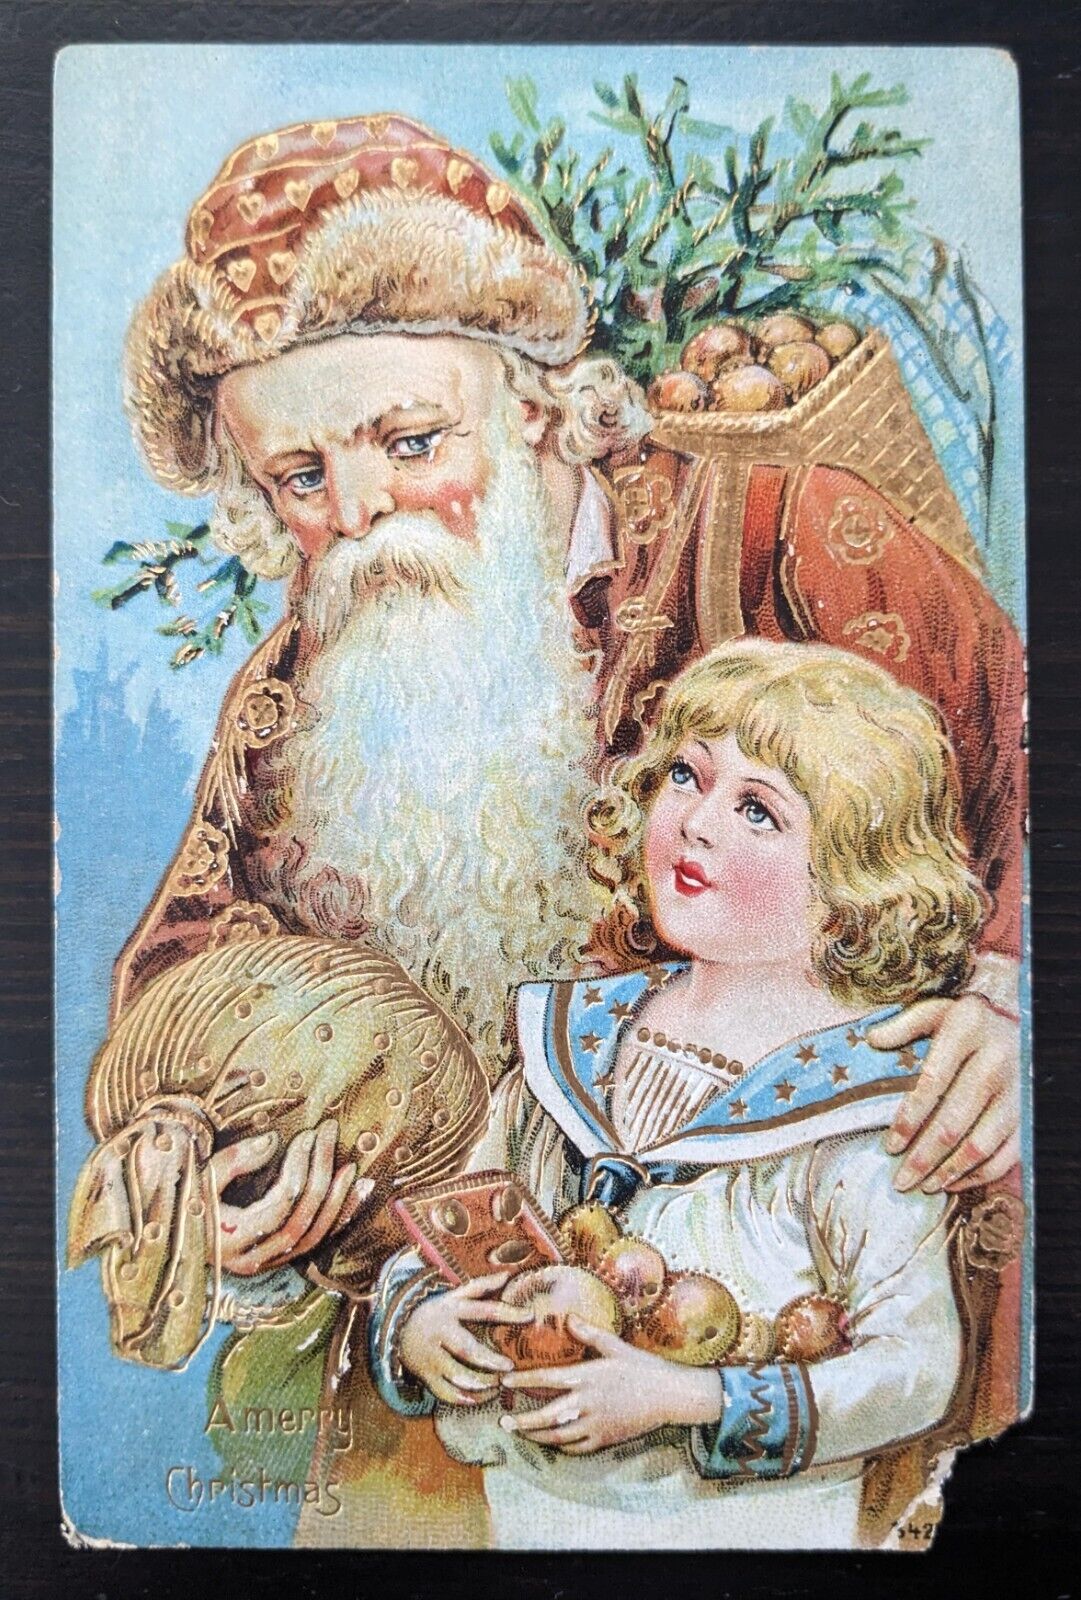 Old World Santa Claus Brown Coat with Child Gold Accents Christmas Postcard